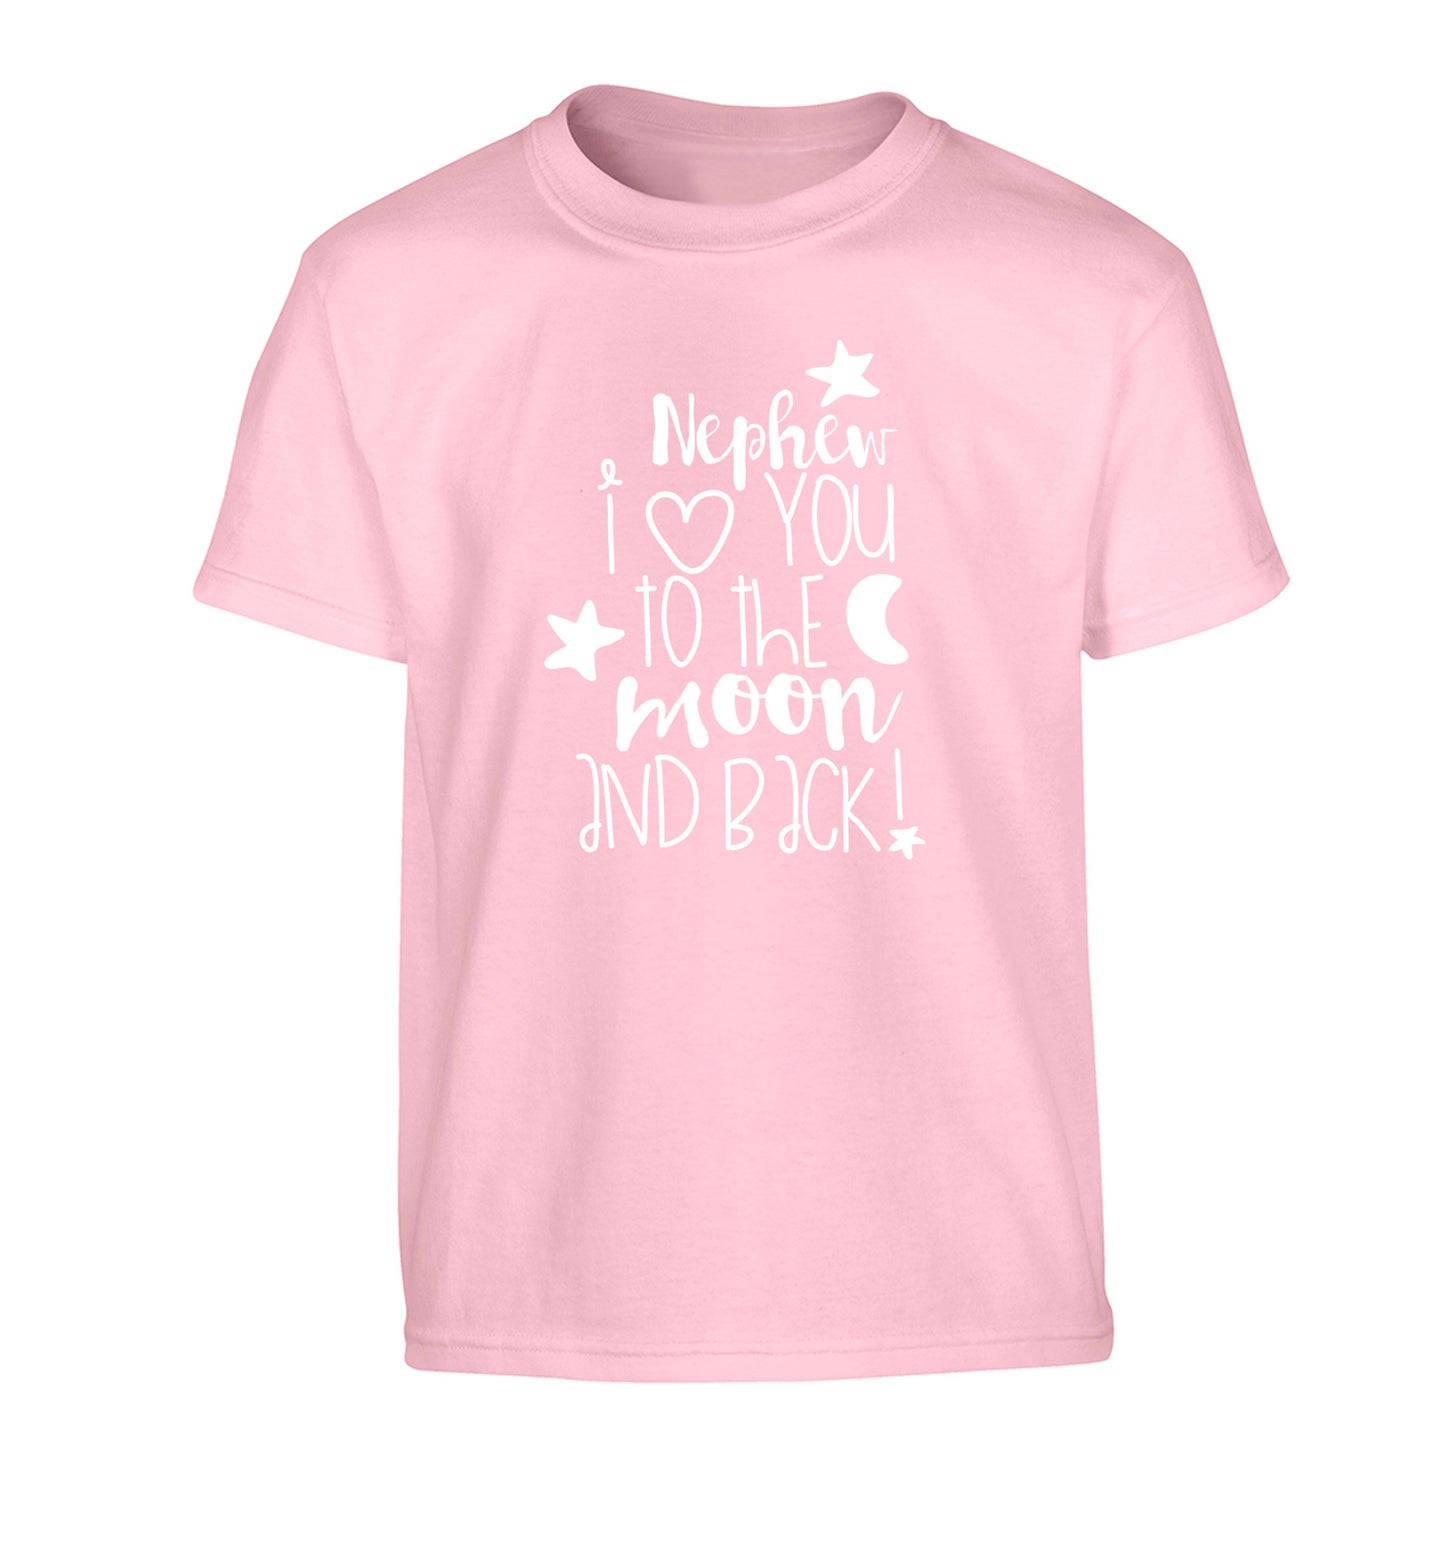 Nephew I love you to the moon and back Children's light pink Tshirt 12-14 Years